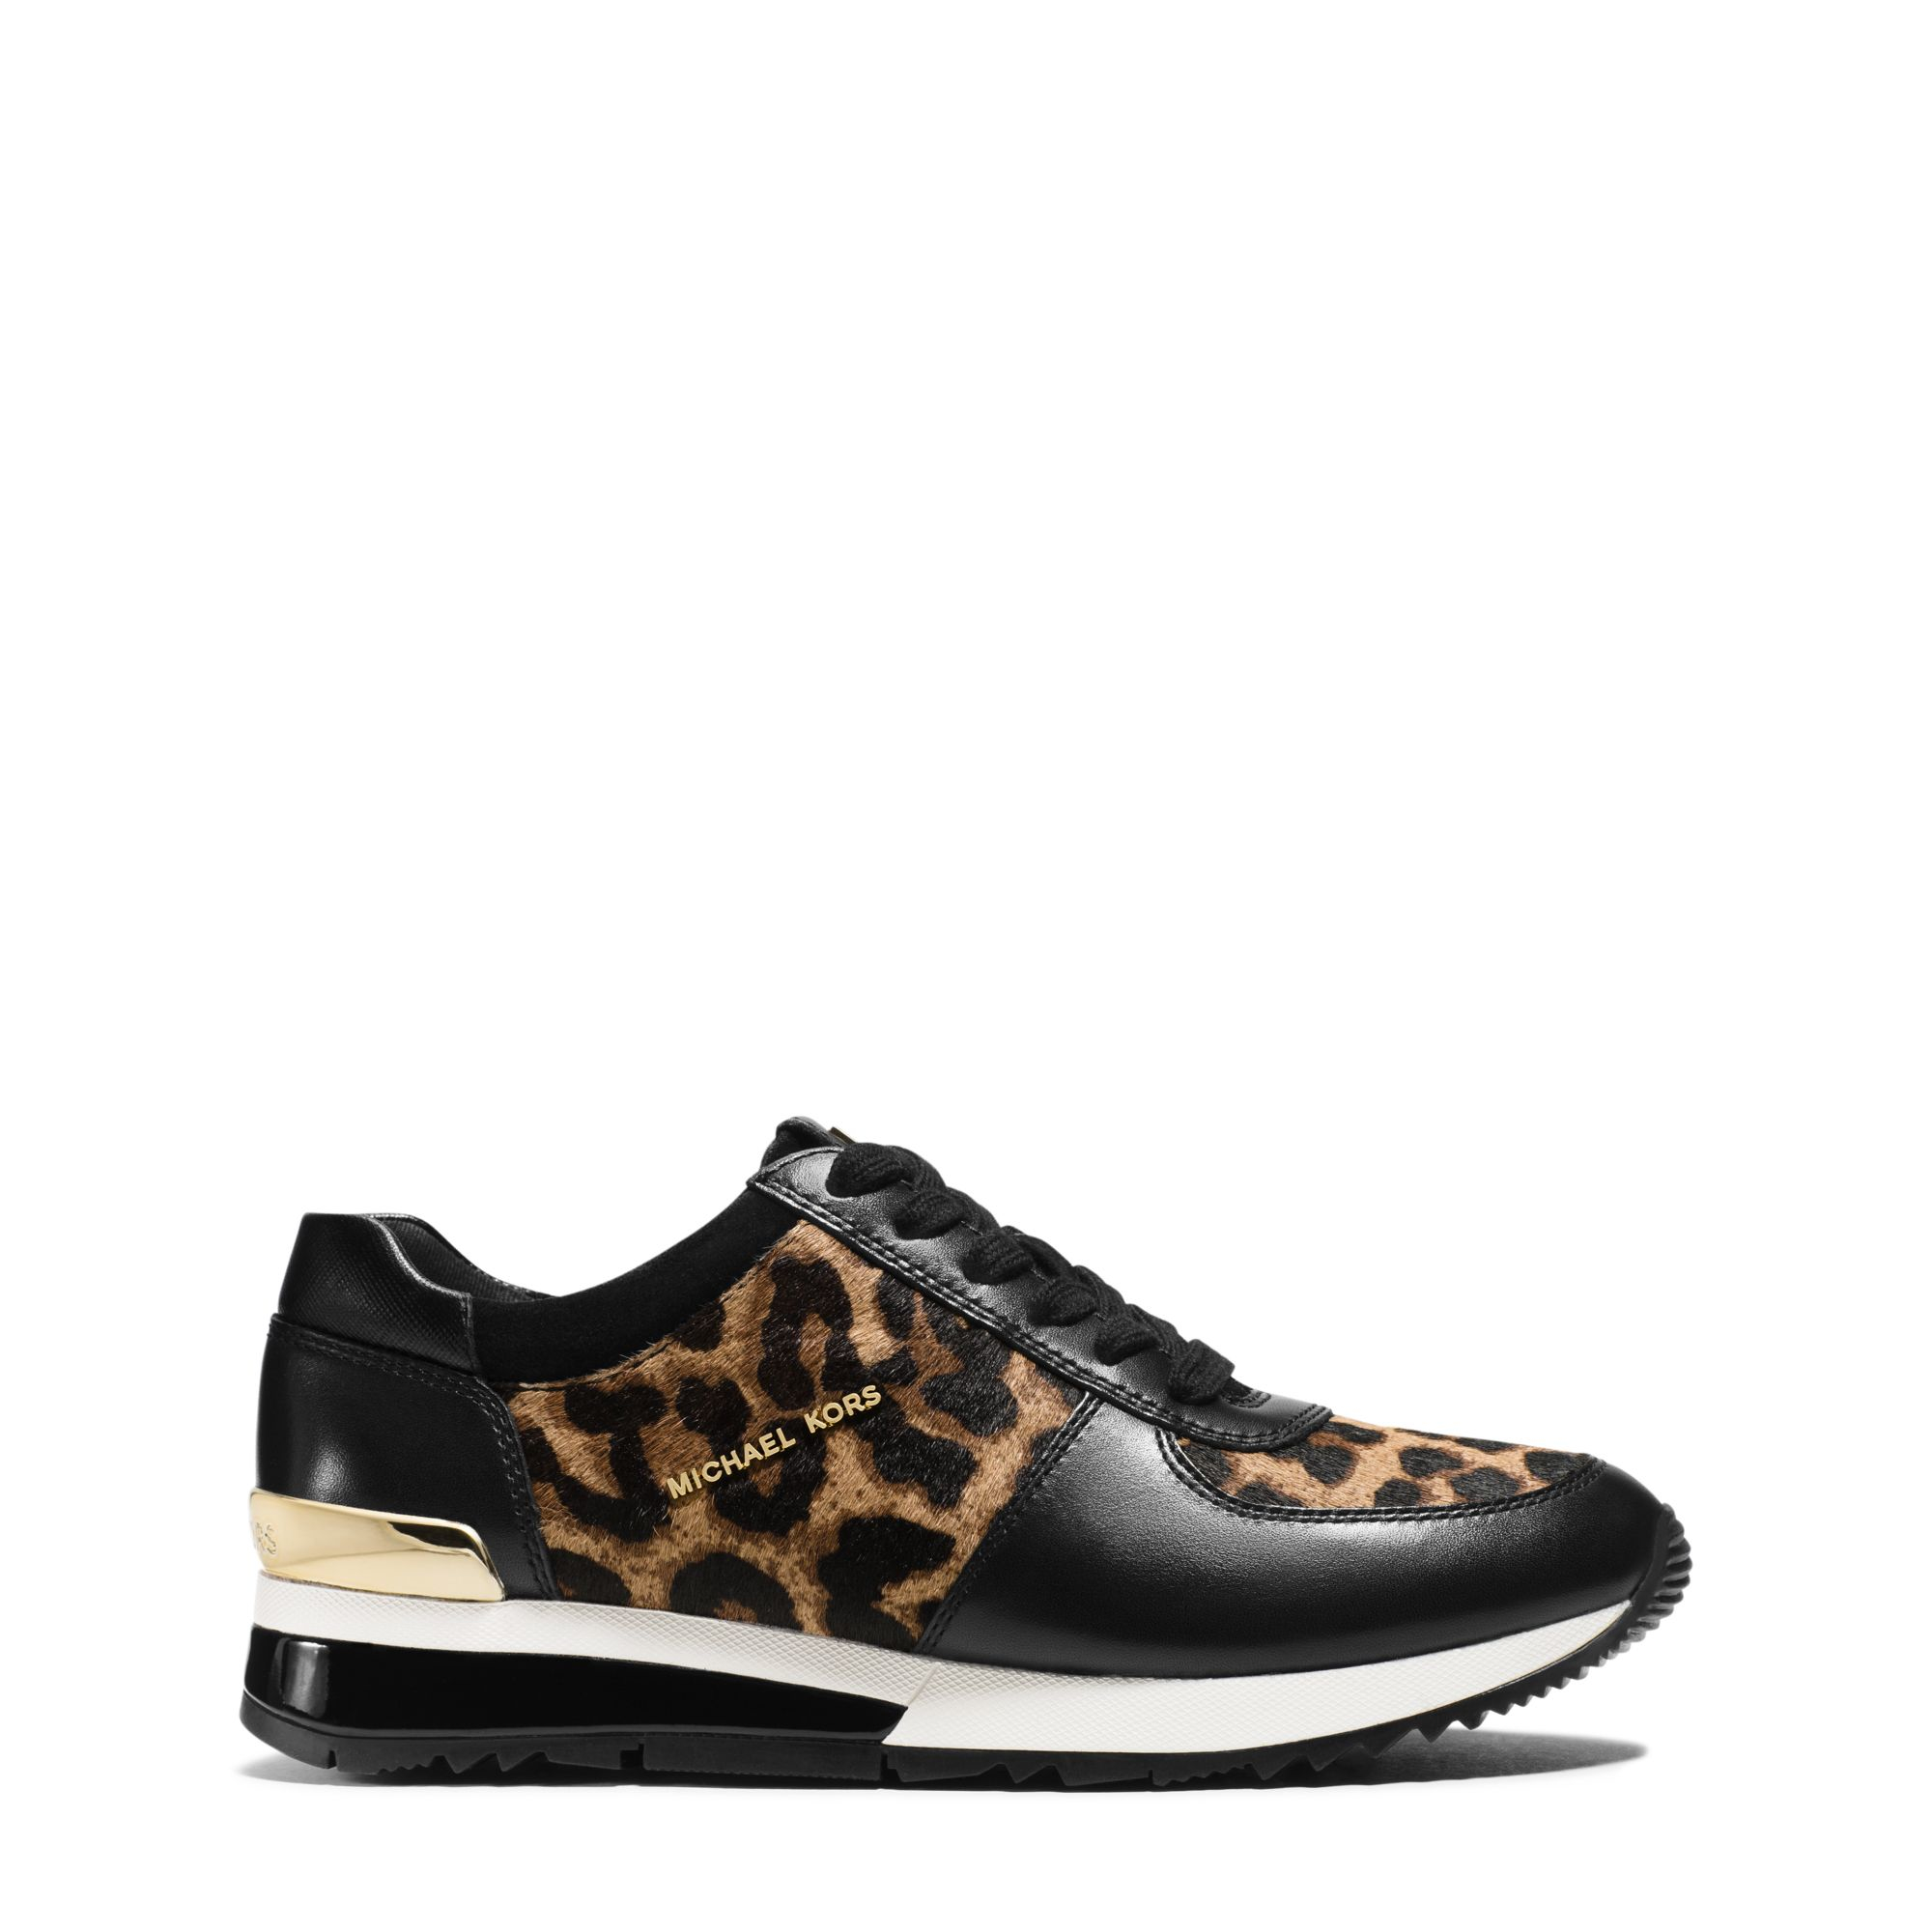 Michael Kors Allie Leopard Calf Hair And Leather Sneaker in Natural - Lyst